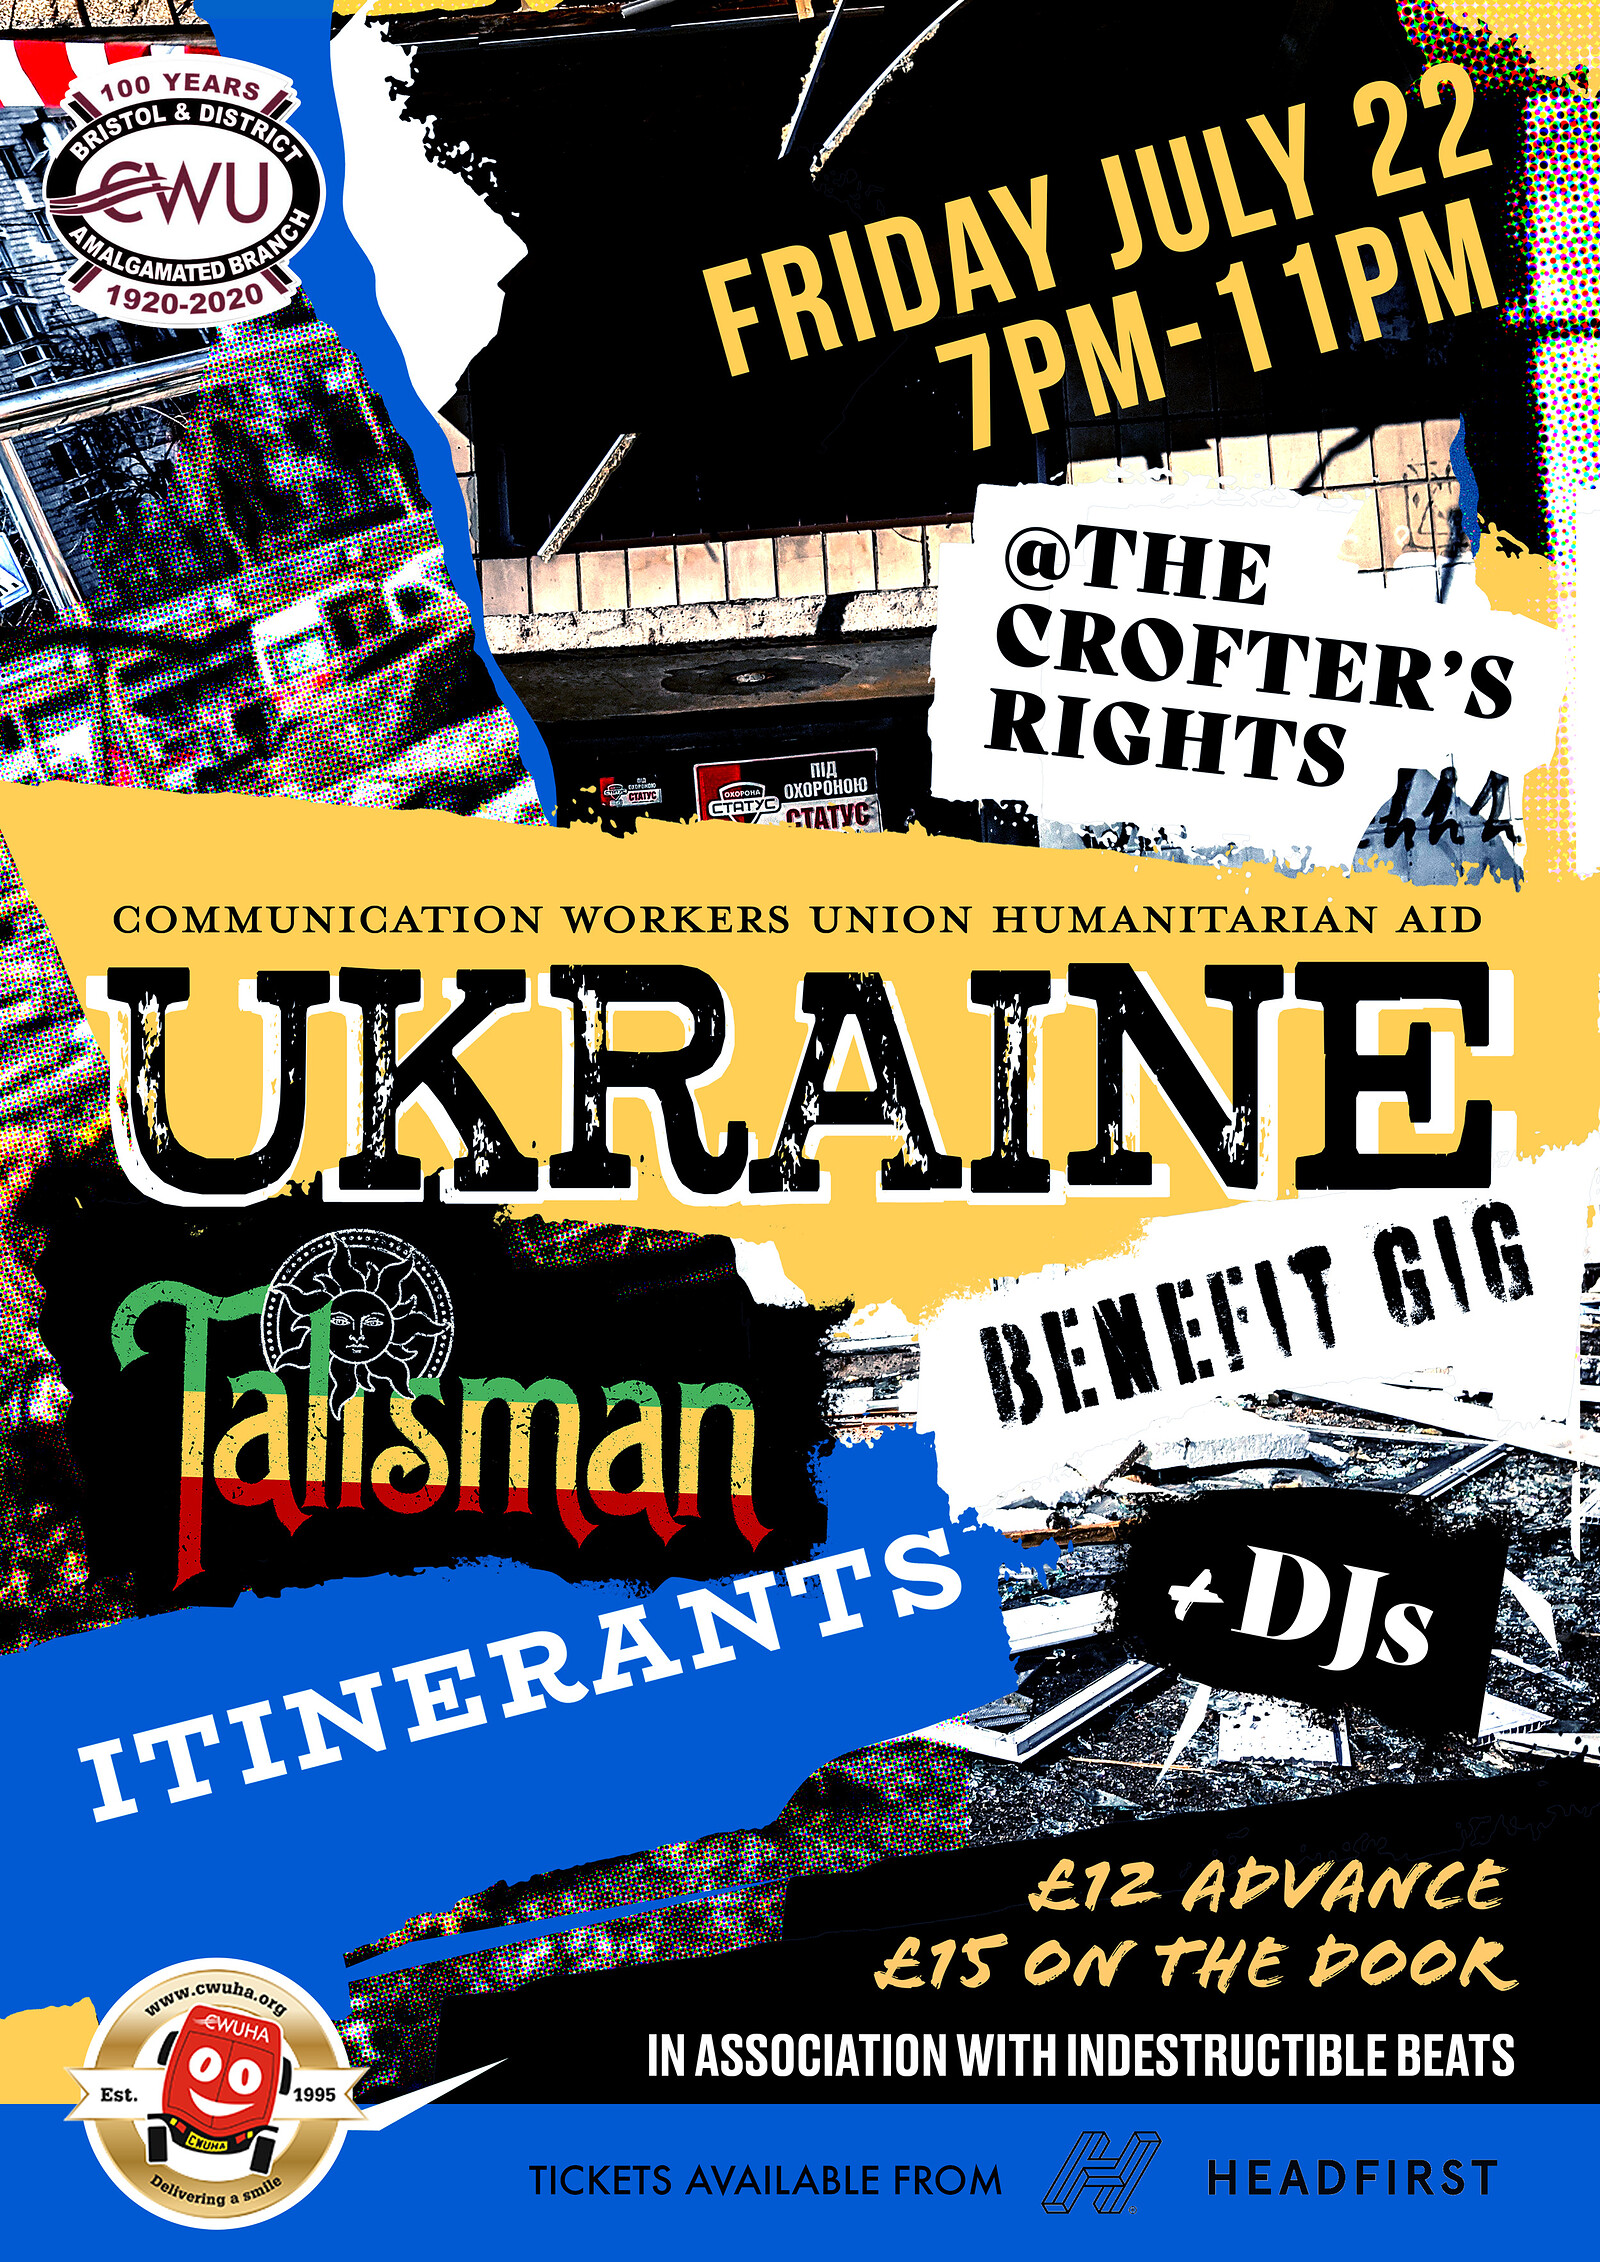 CWU Ukraine Benefit Gig, with Talisman/Itinerants at Crofters Rights